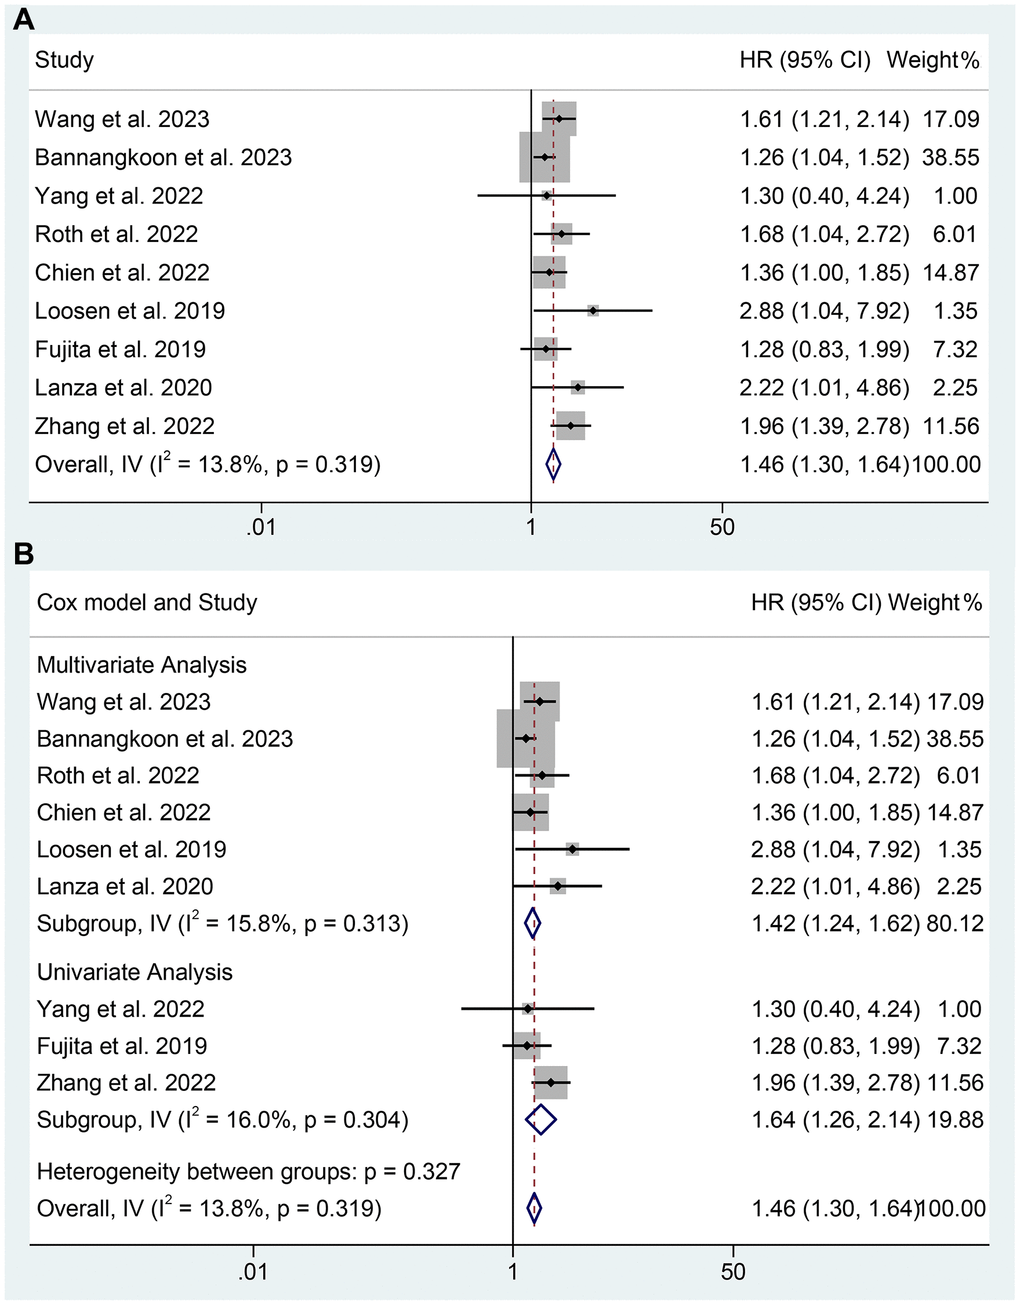 The relationship between sarcopenia and OS in TAE or TACE treated HCC patients. (A) The overall analysis; (B) Subgroup analysis including multivariate analysis and univariate analysis.